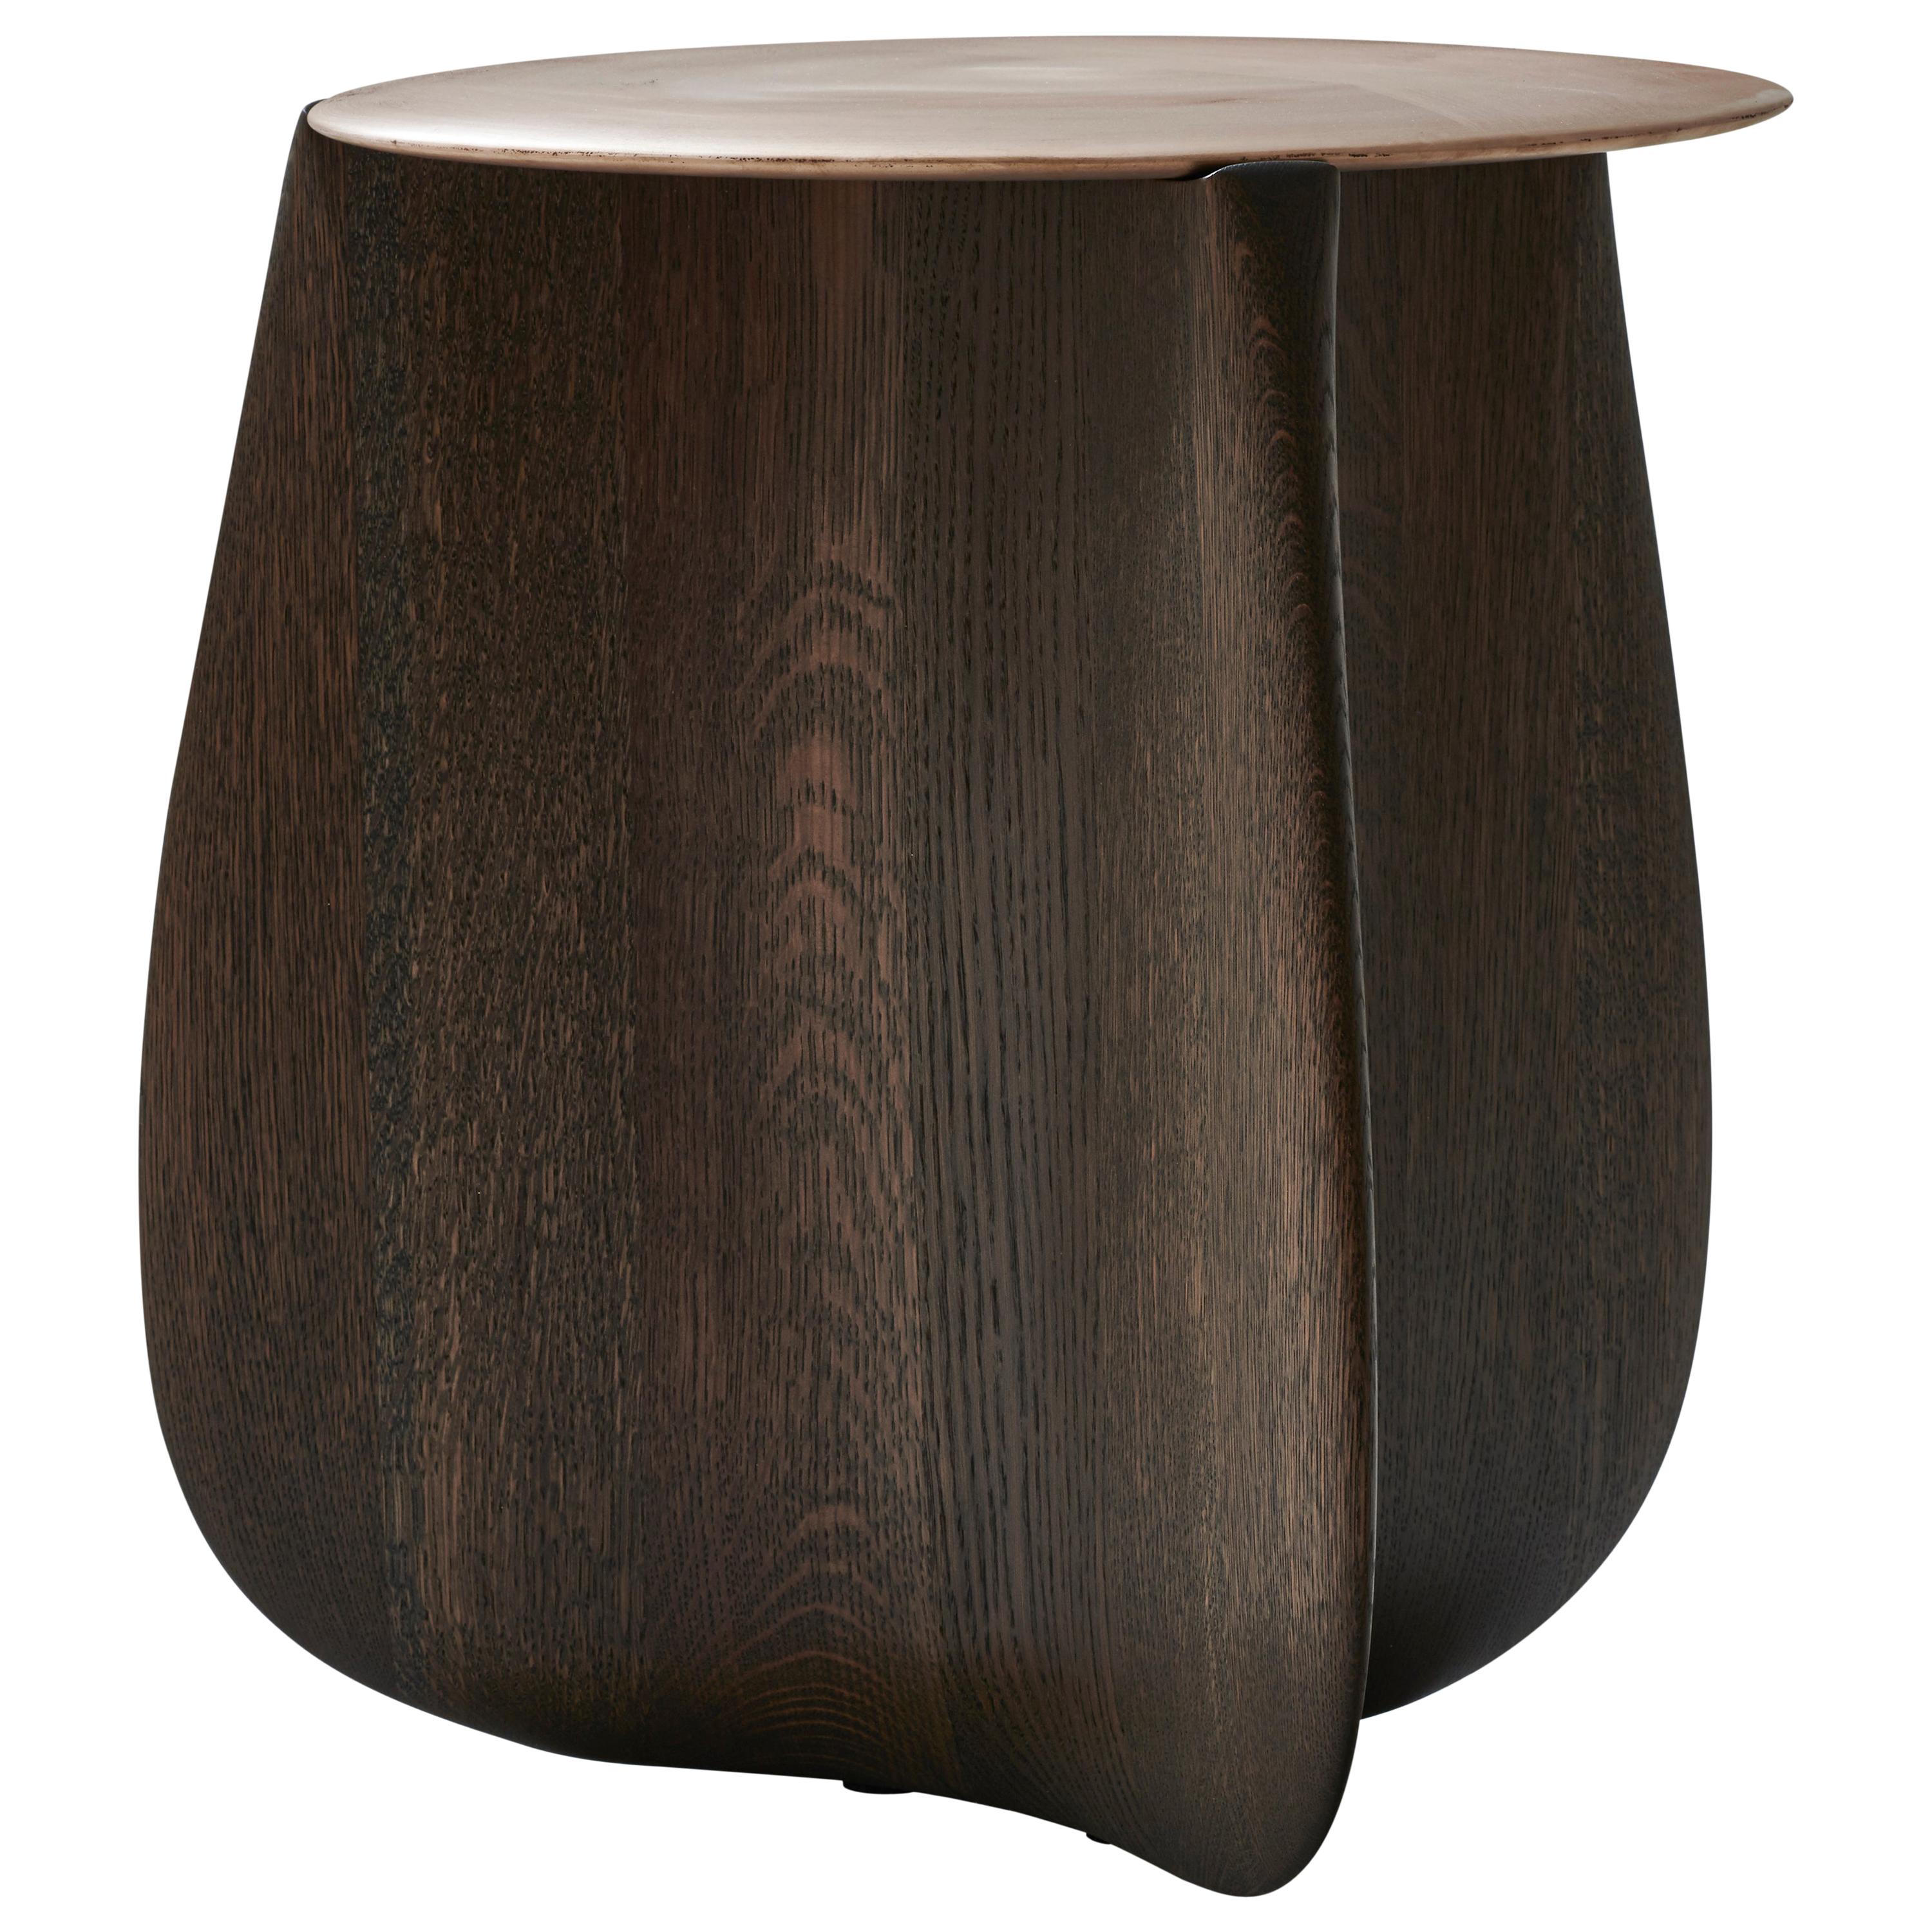 Sine by Izm Design is a 2020 Best of Year recipient from Interior Design Magazine. It features a burnished, cast bronze top perched on a sculpted, solid hardwood base.. A stunning piece that blurs the lines between art & furniture. 
Available in 2